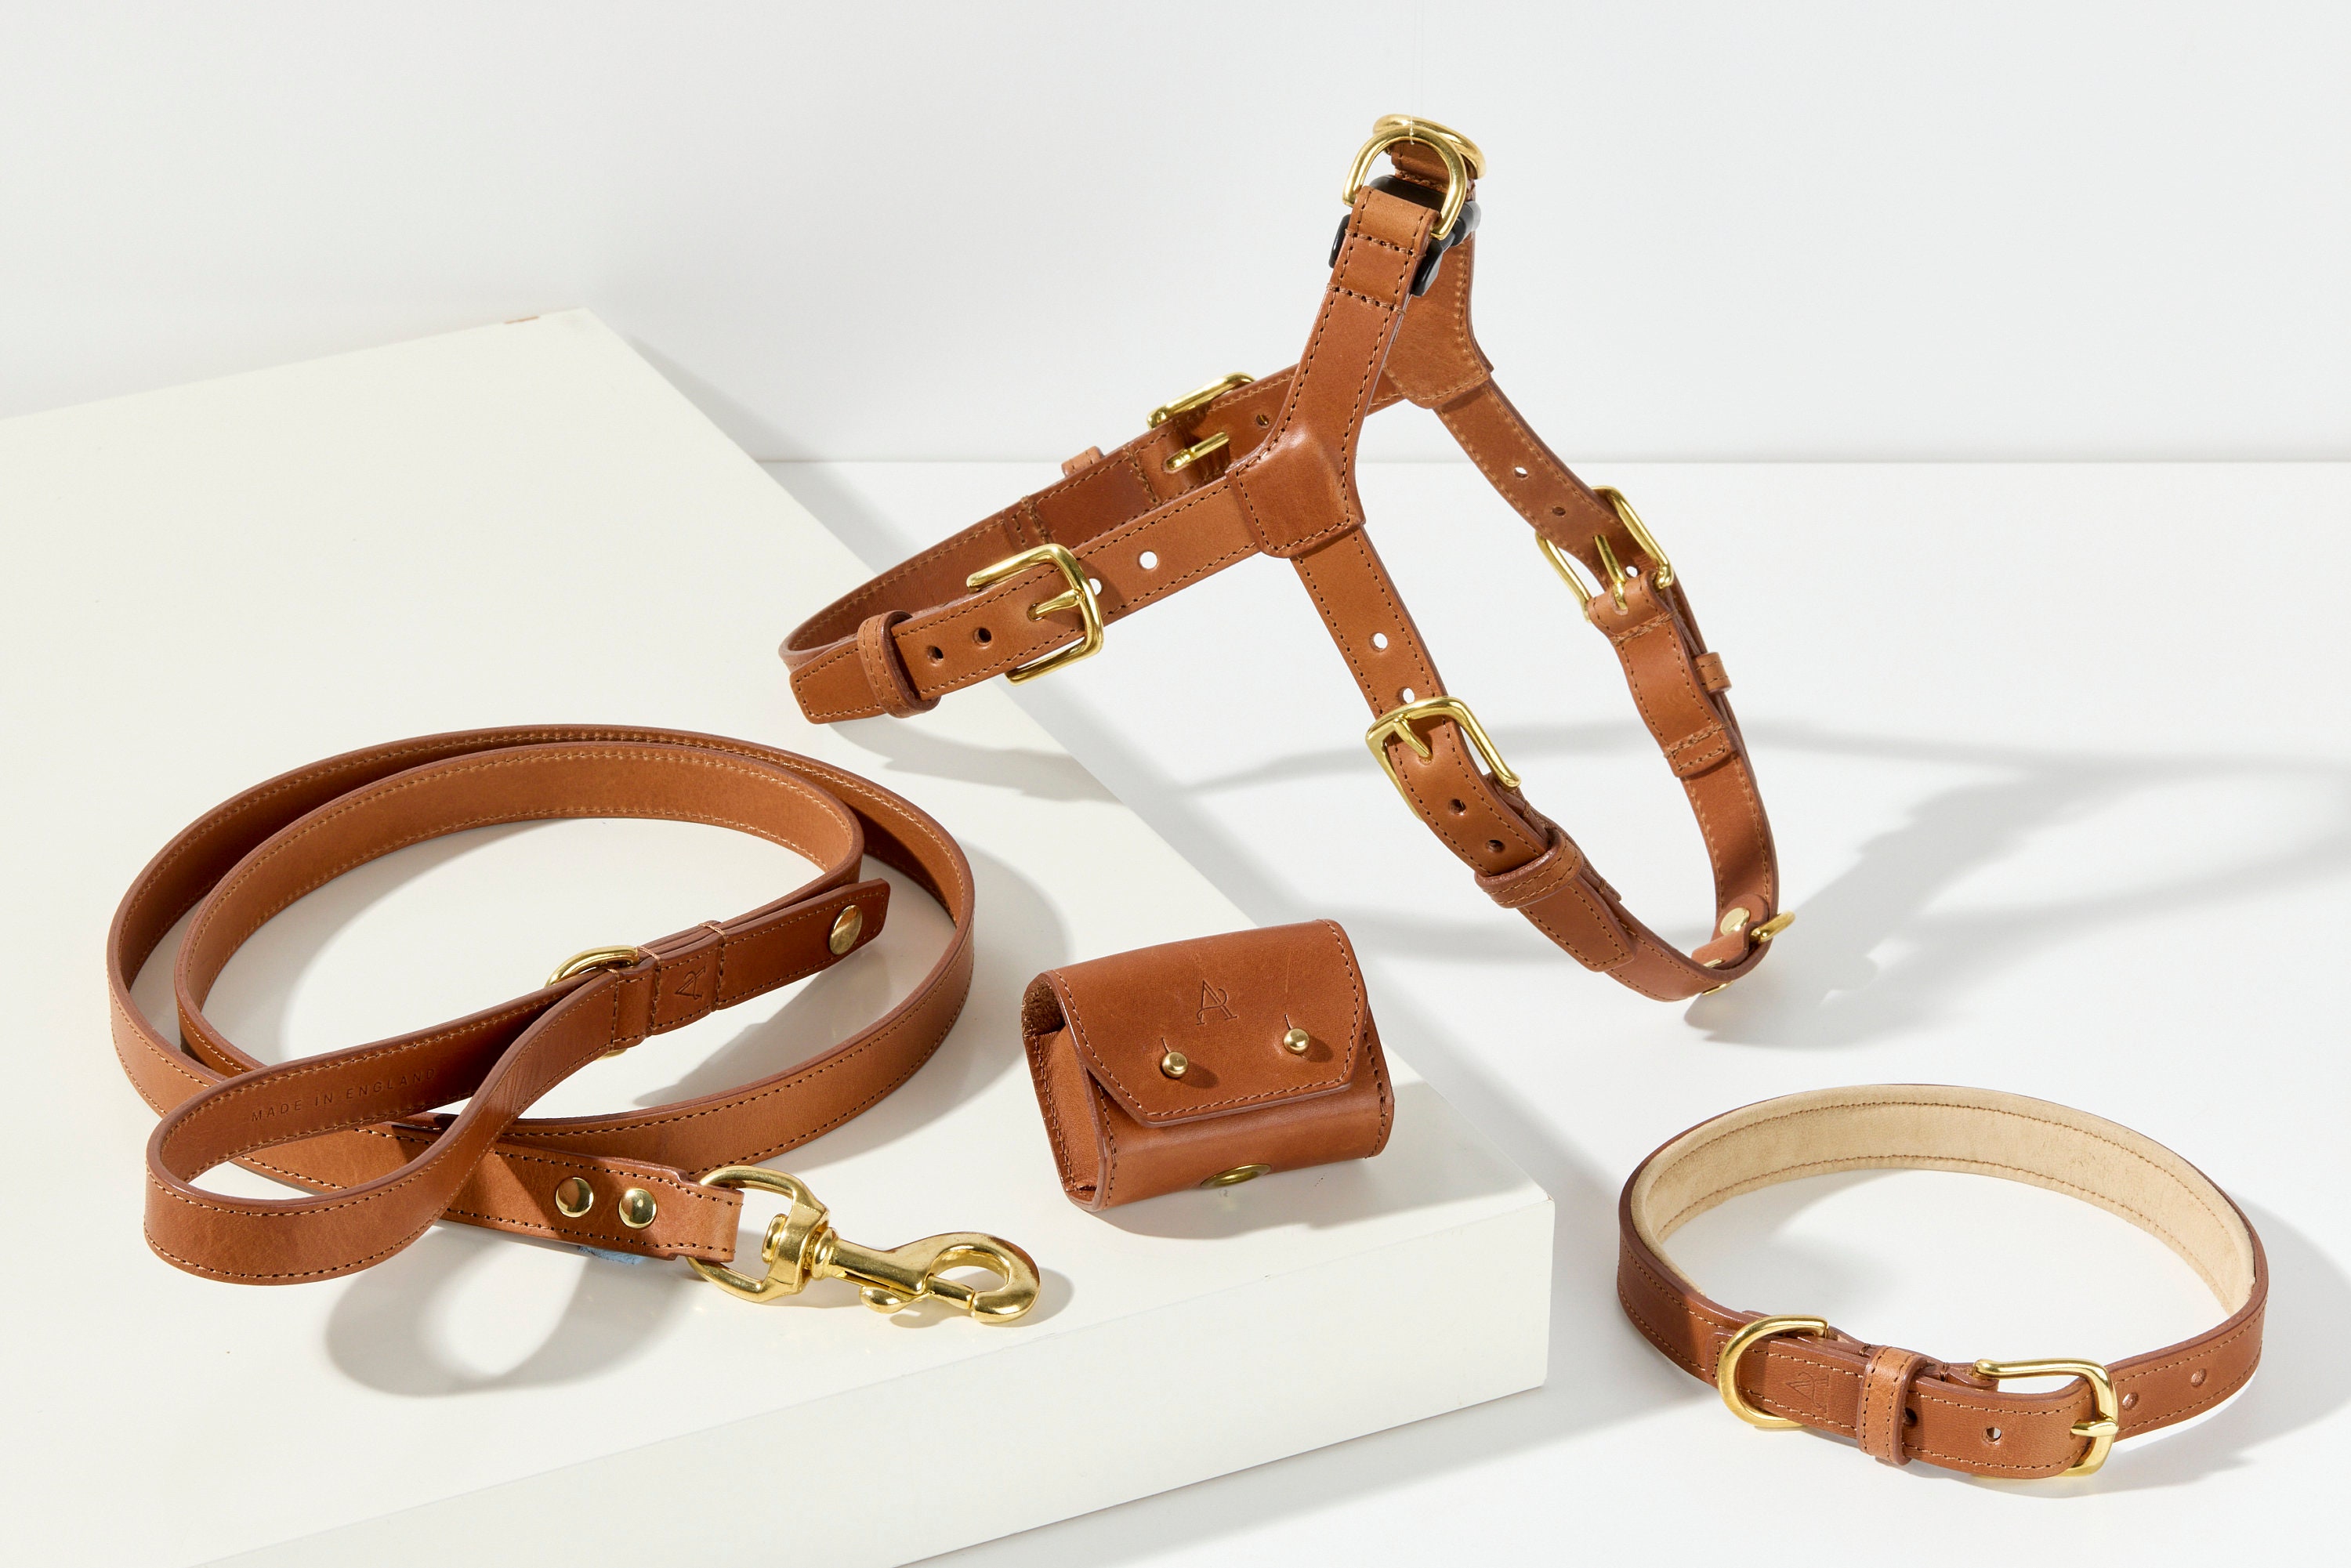 GUCCI Dog Collar & Leash Sherry line Leather F/S From JAPAN